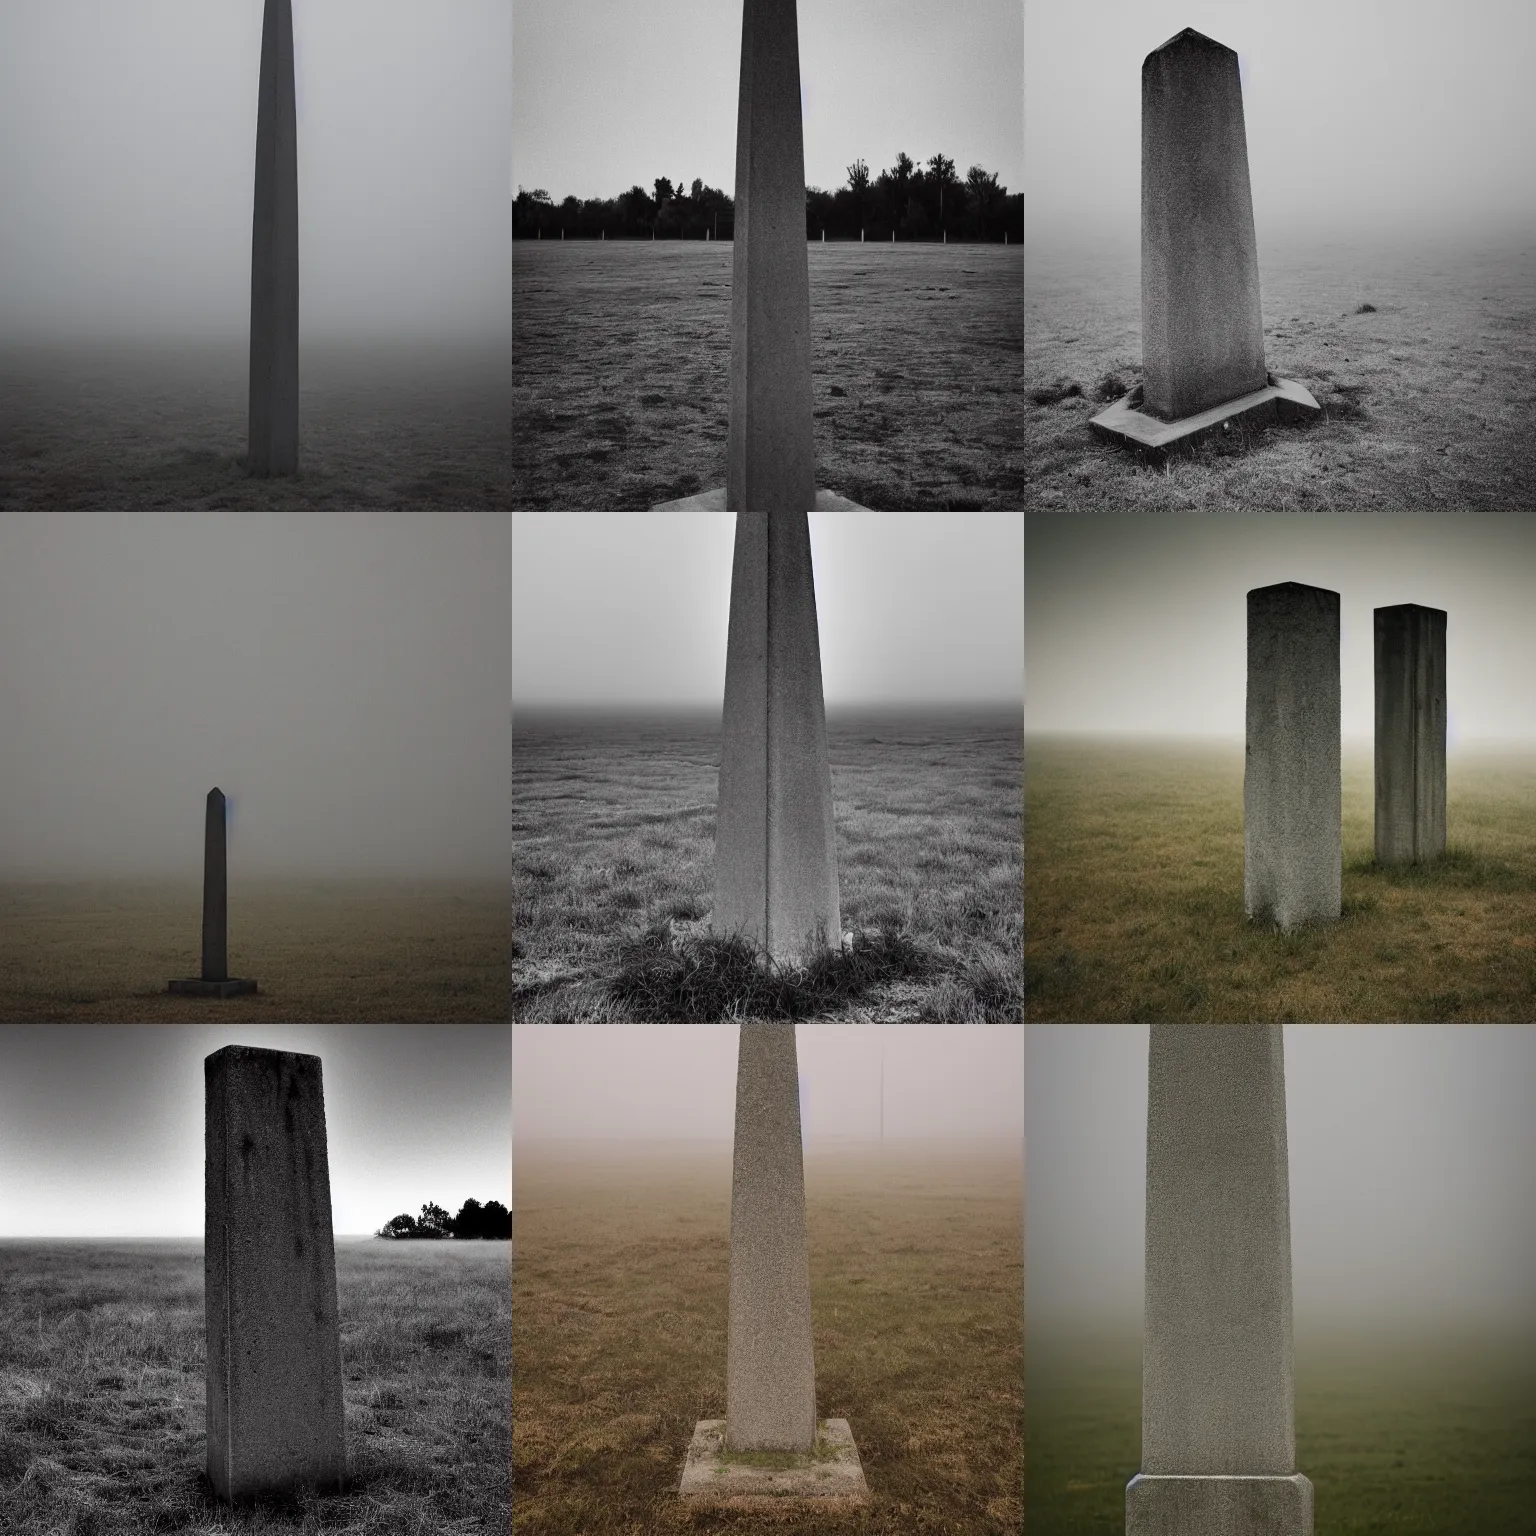 Prompt: Photo of an abandoned concrete obelisk in a barren field, overcast and dense fog